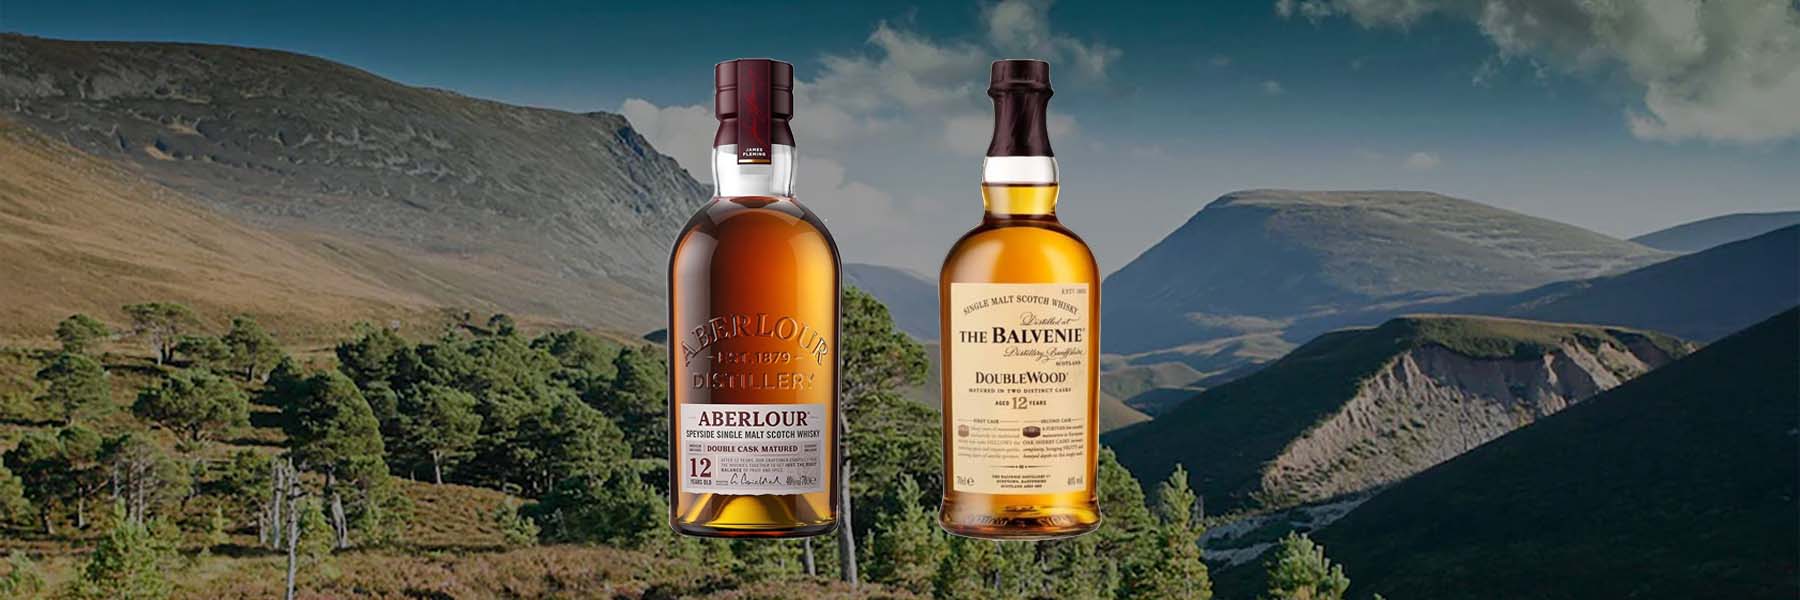 Aberlour 12 vs Balvenie 12 – What’s The Difference?